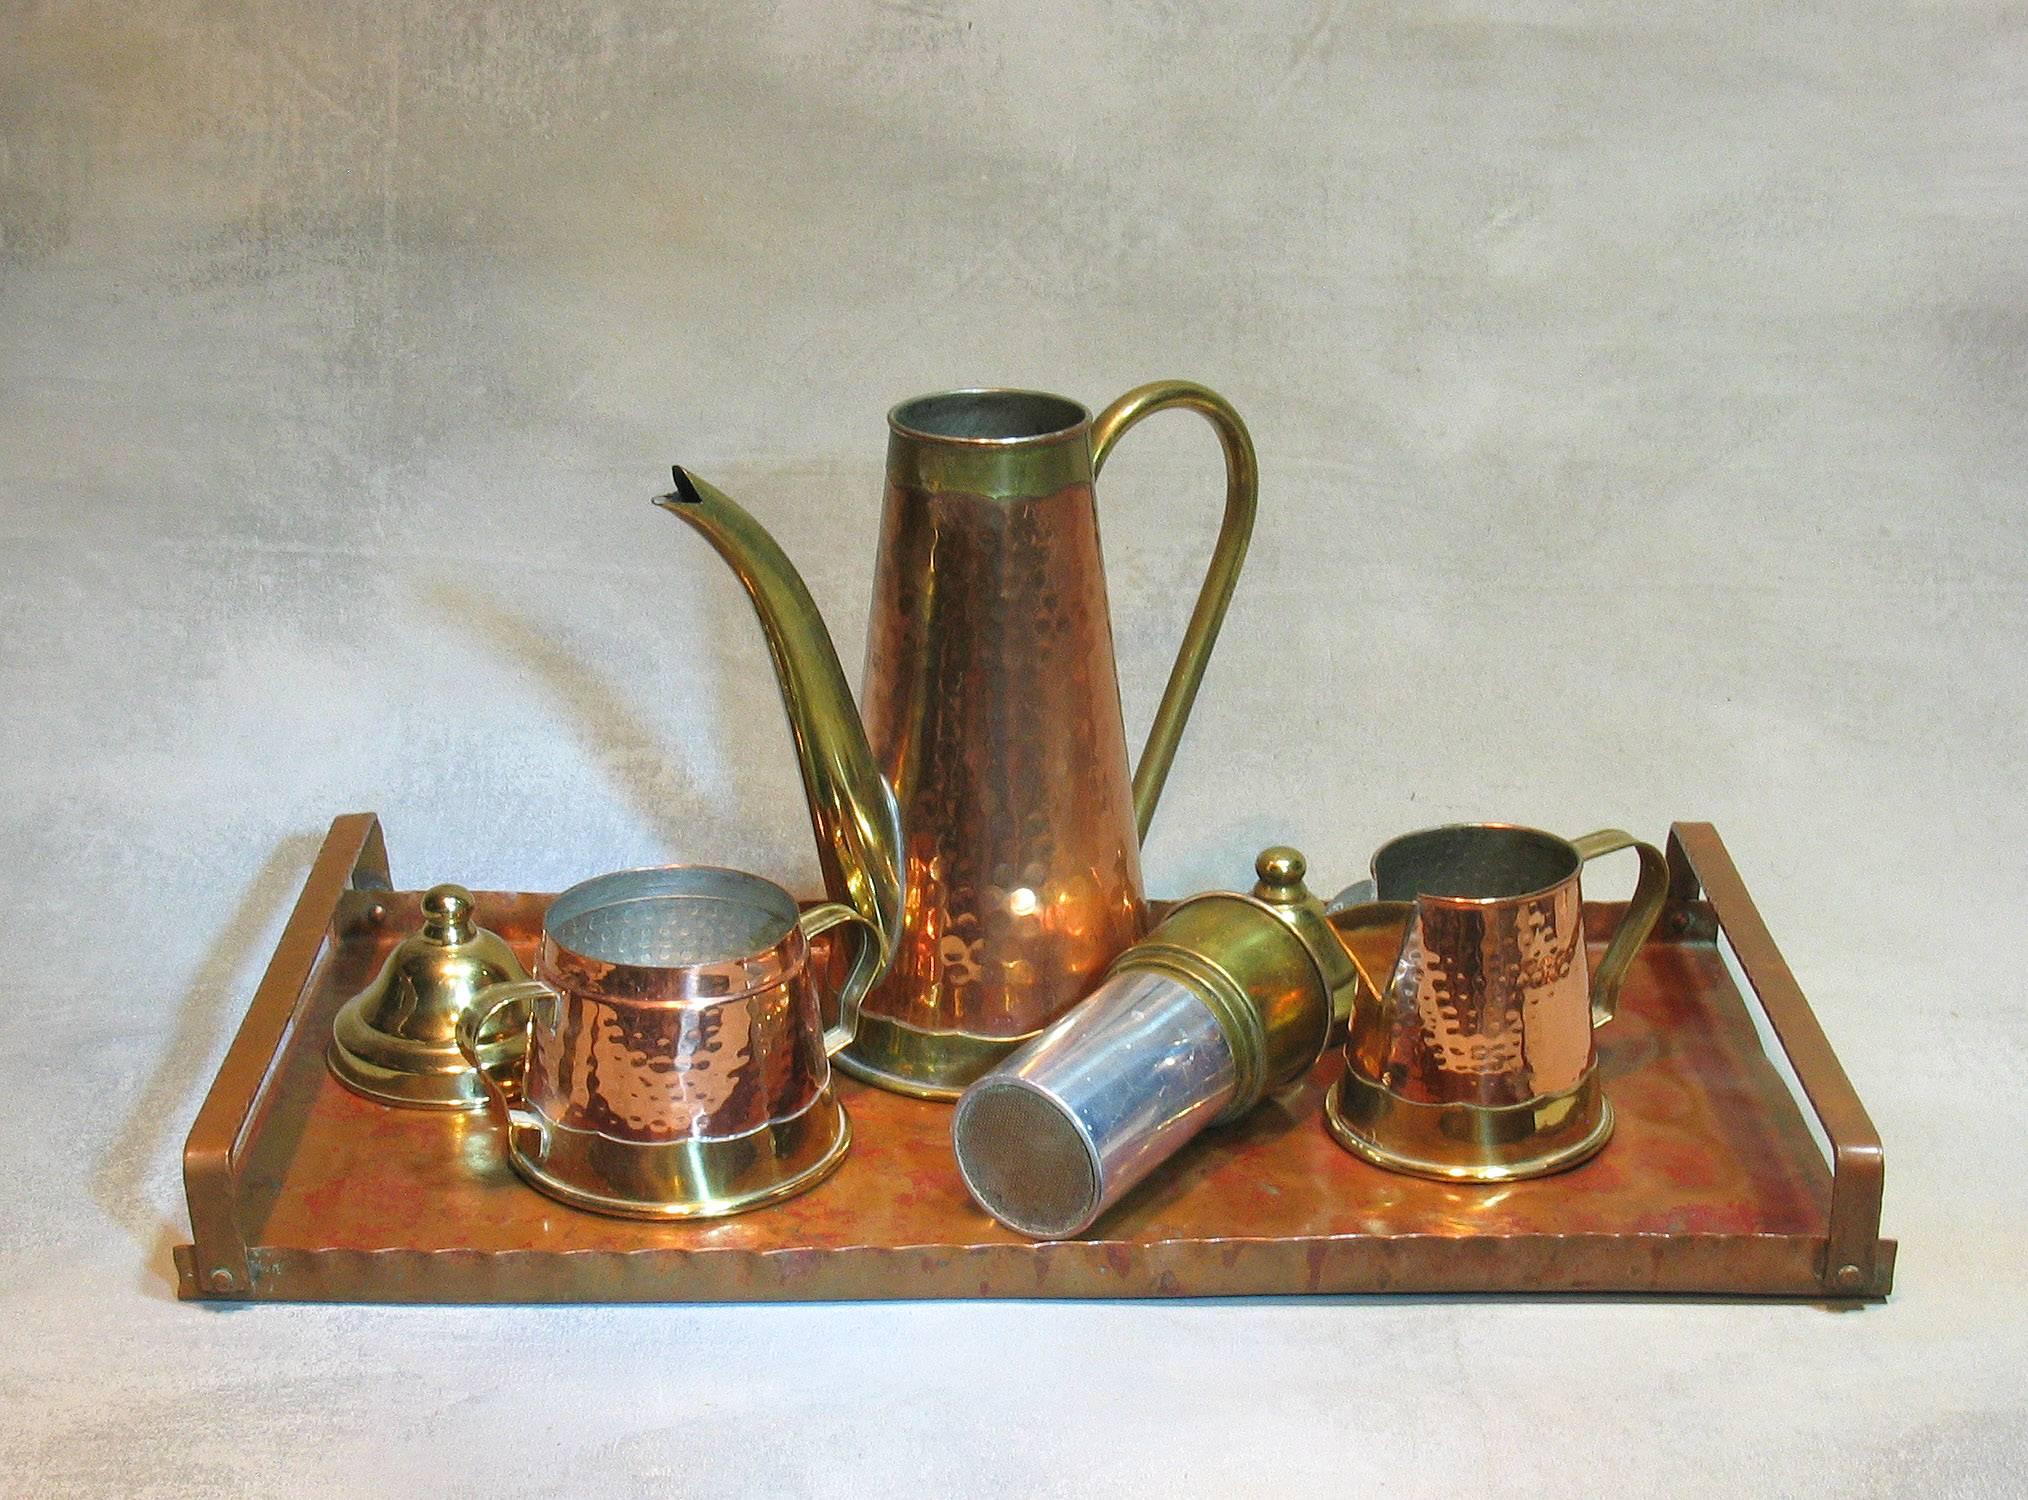 An exquisite planished copper and brass coffee set, By Dinanderie de Mecap, Made in Belgium. The four piece set consists of a tall coffee pot with interior filter, creamer, and sugar on a matching rectangular copper tray with handles. Made in